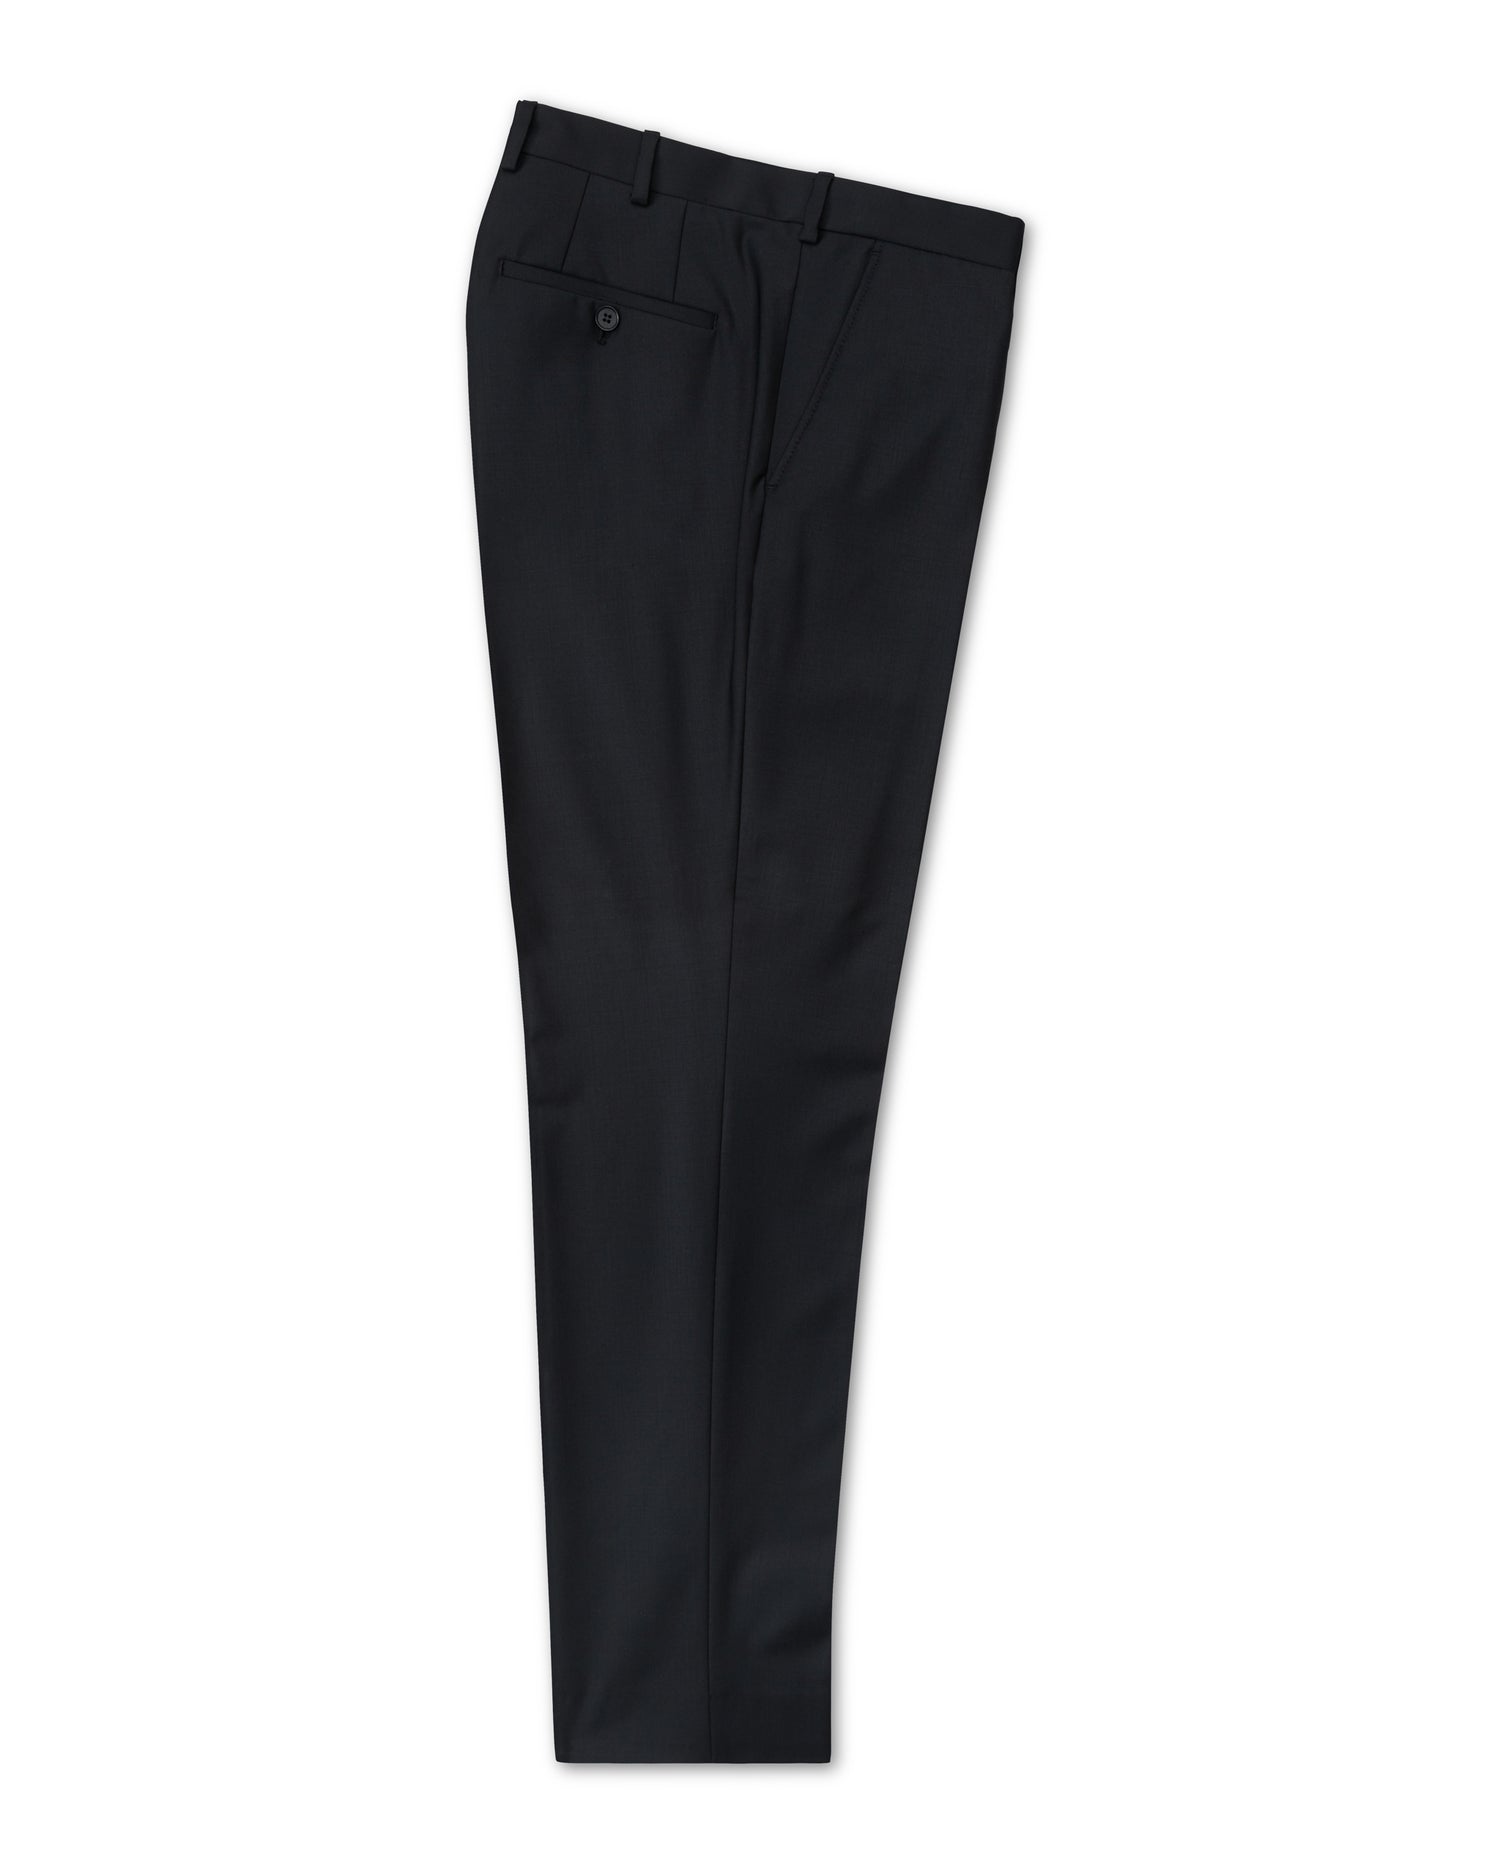 Black Athlete Fit Suit Trousers in Stretch Fabric (2145260109886)